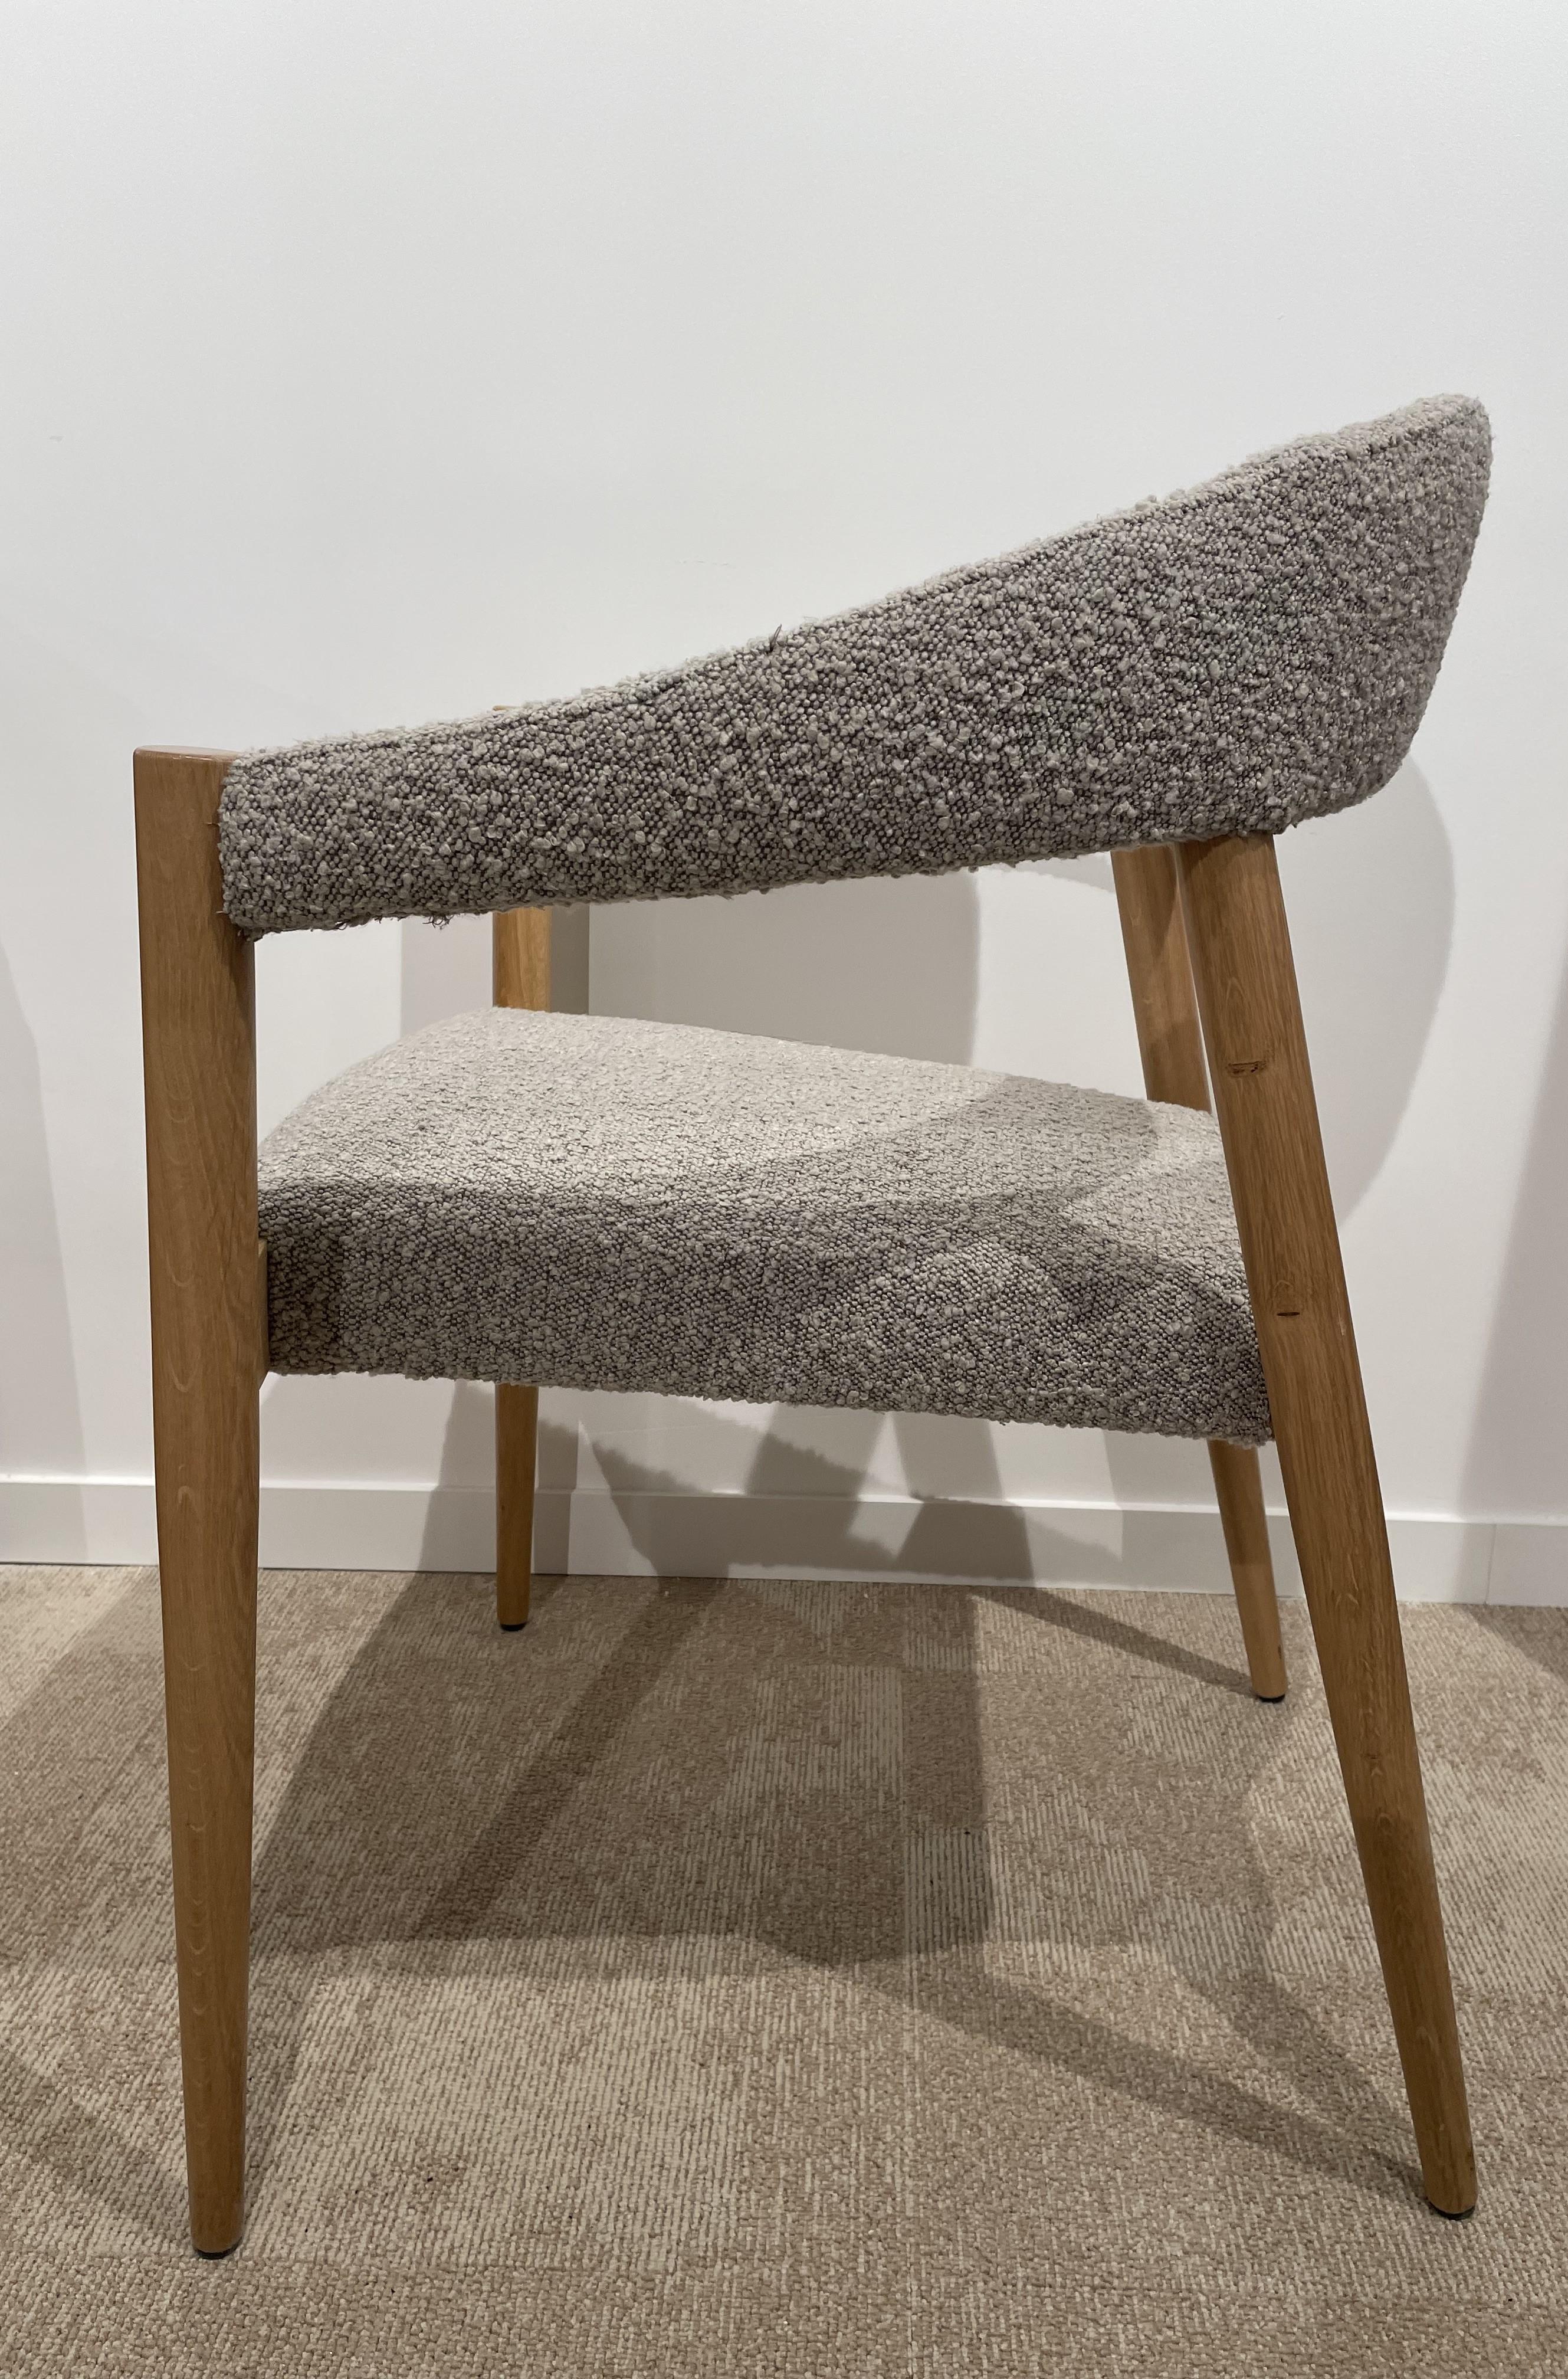 1960s Danish Design and Scandinavian Style Wooden and Bouclé Fabric Chair For Sale 2